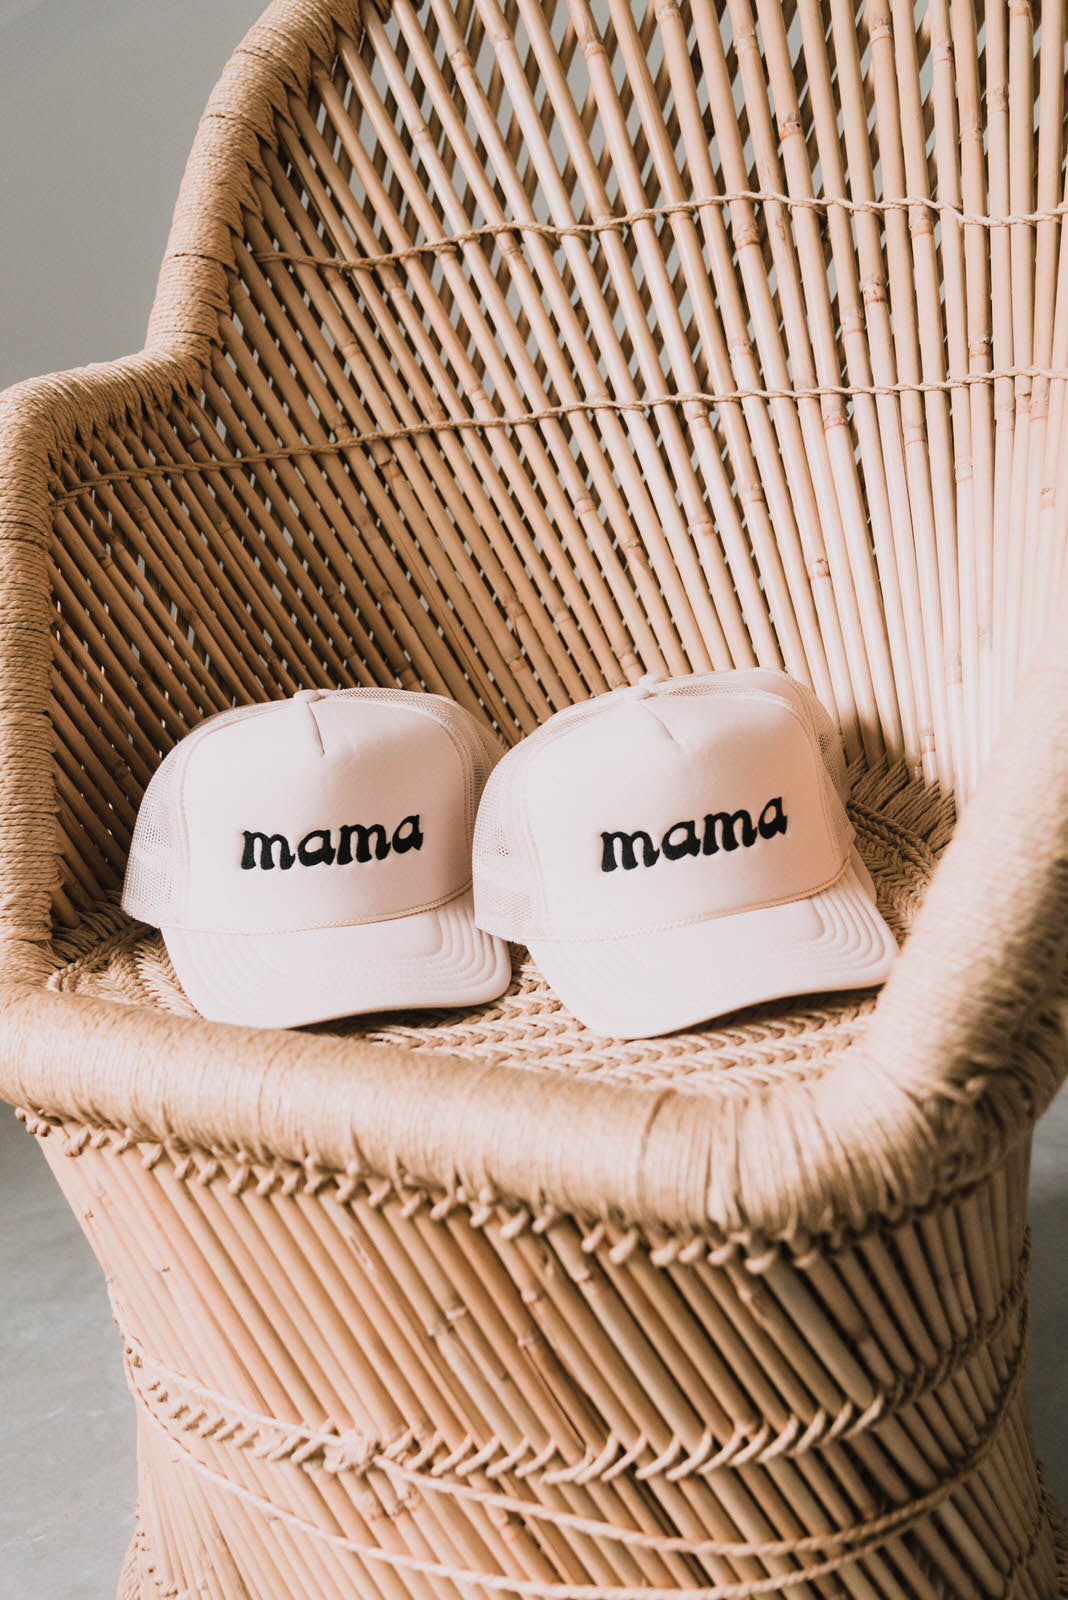 Mama embroidered Trucker Hat